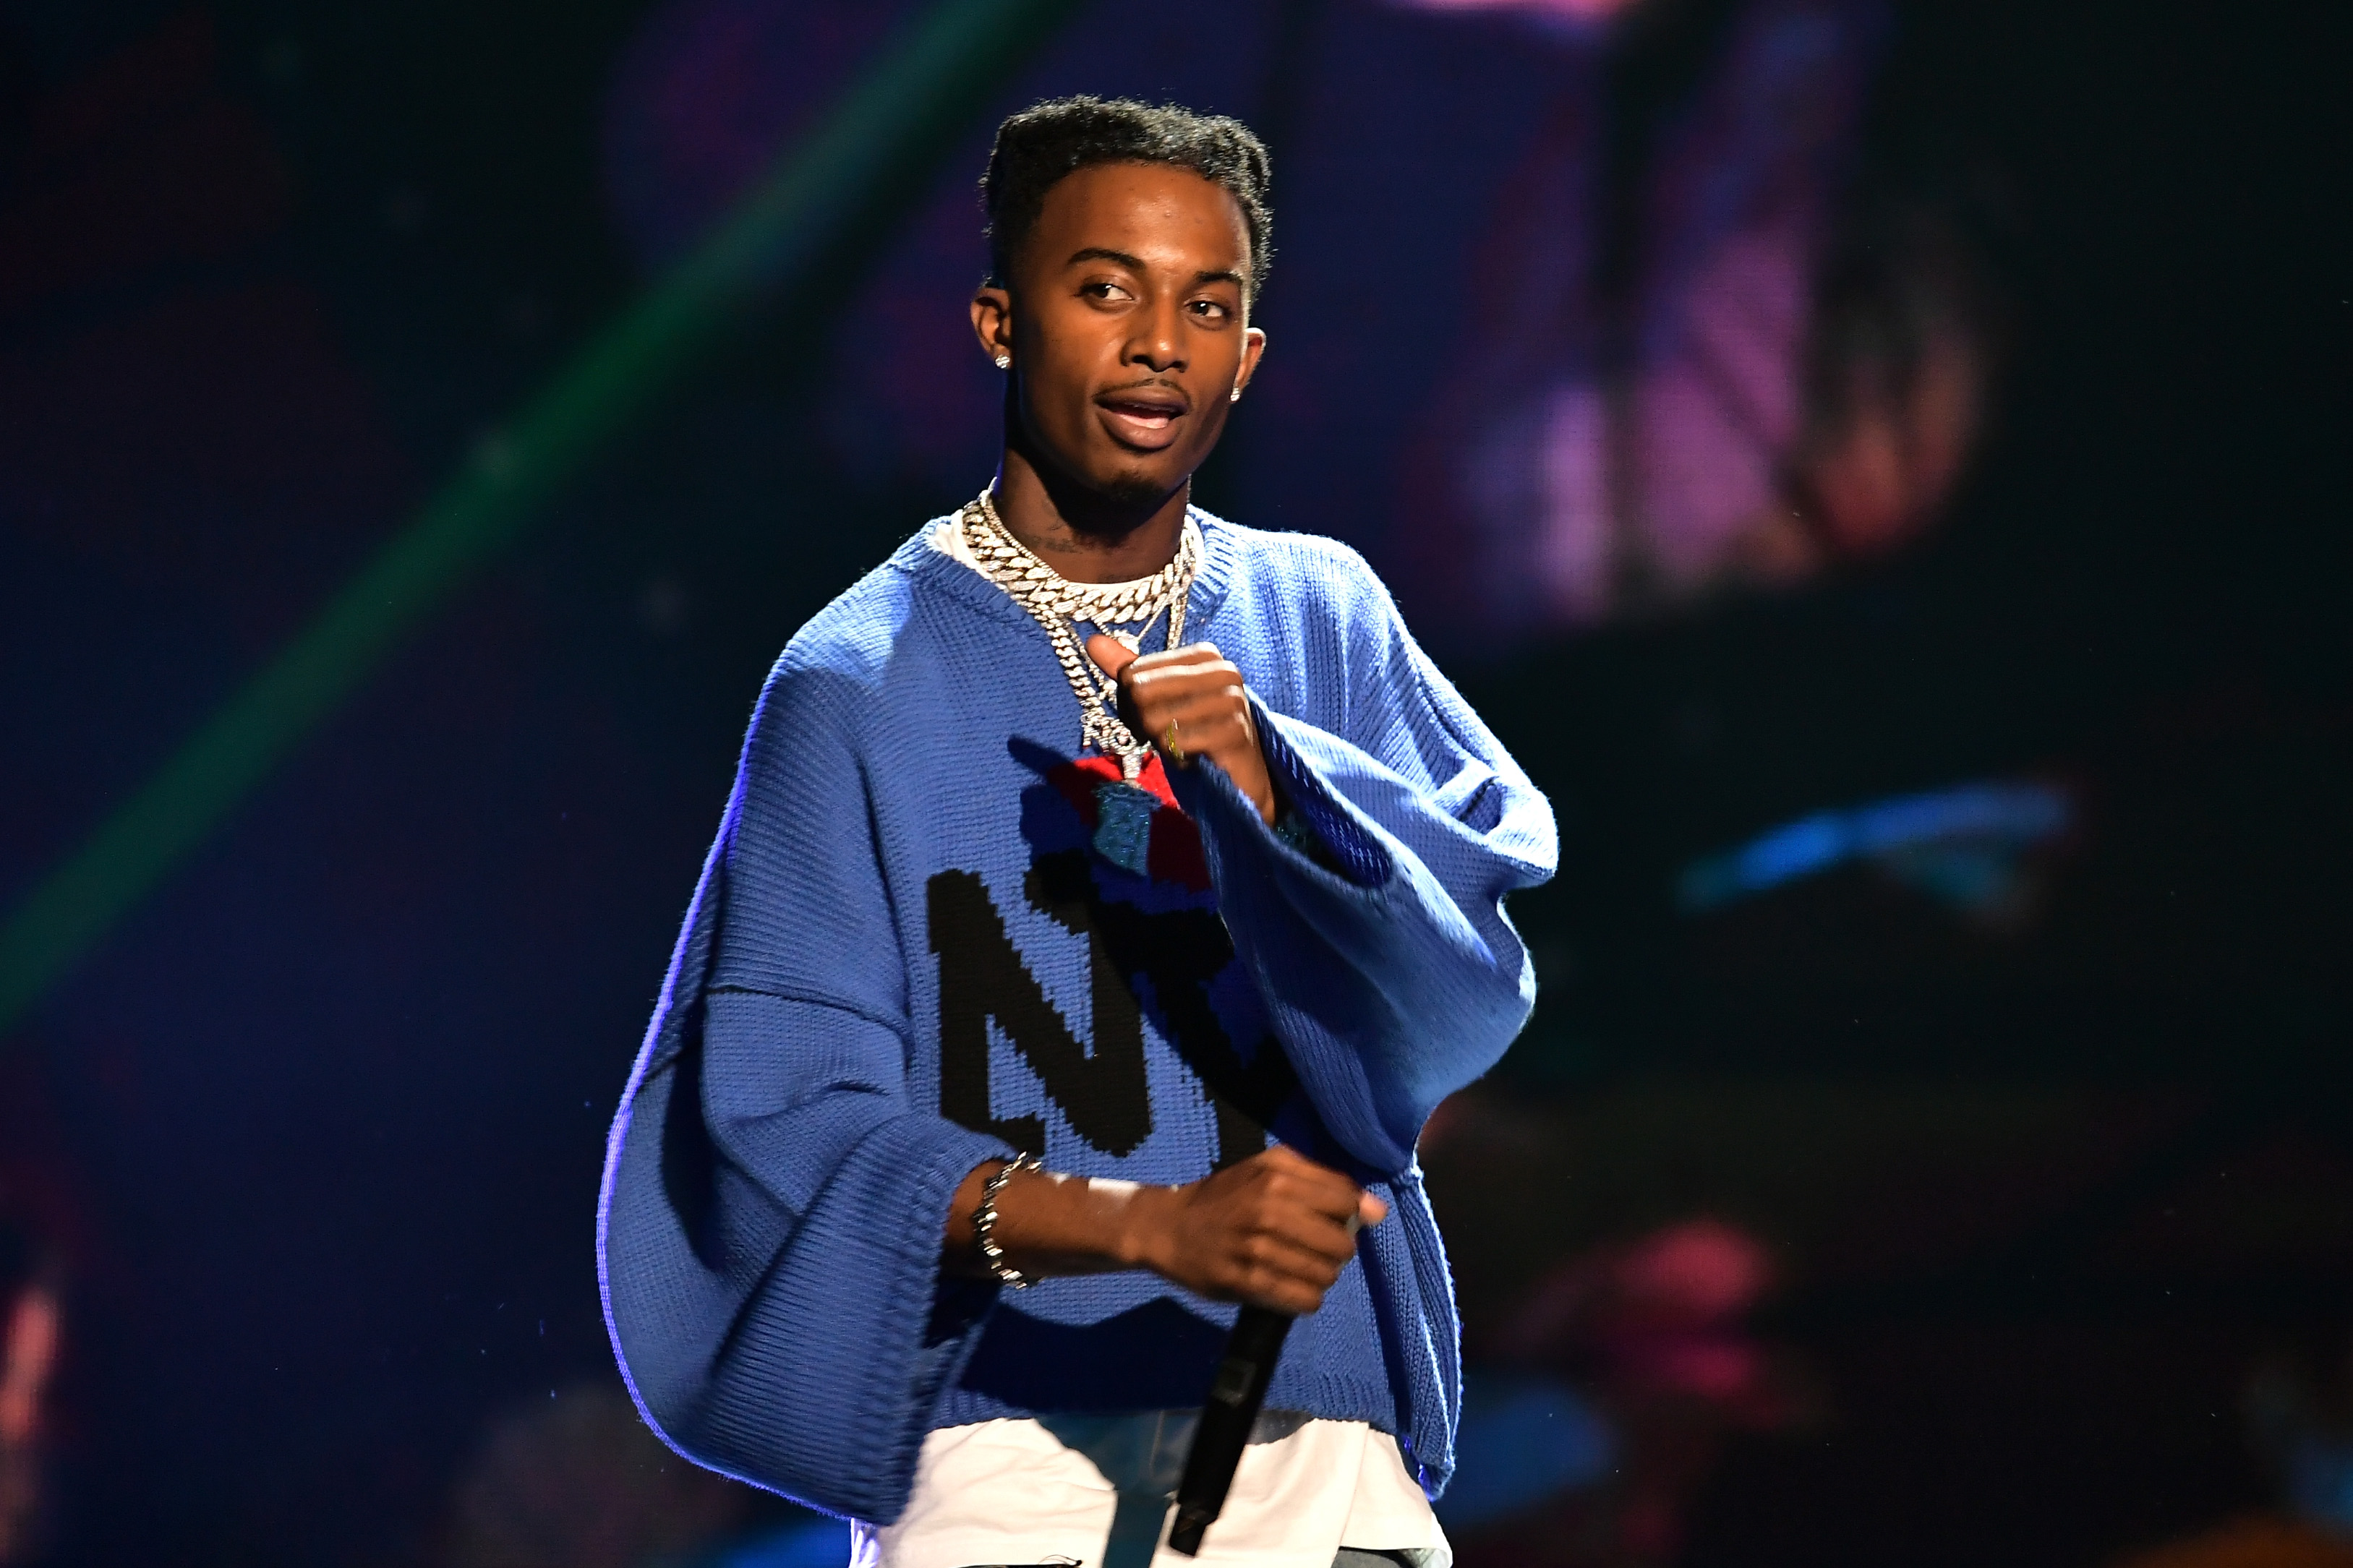 Eliantte Says They've Never Had A Payment Problem With Playboi Carti